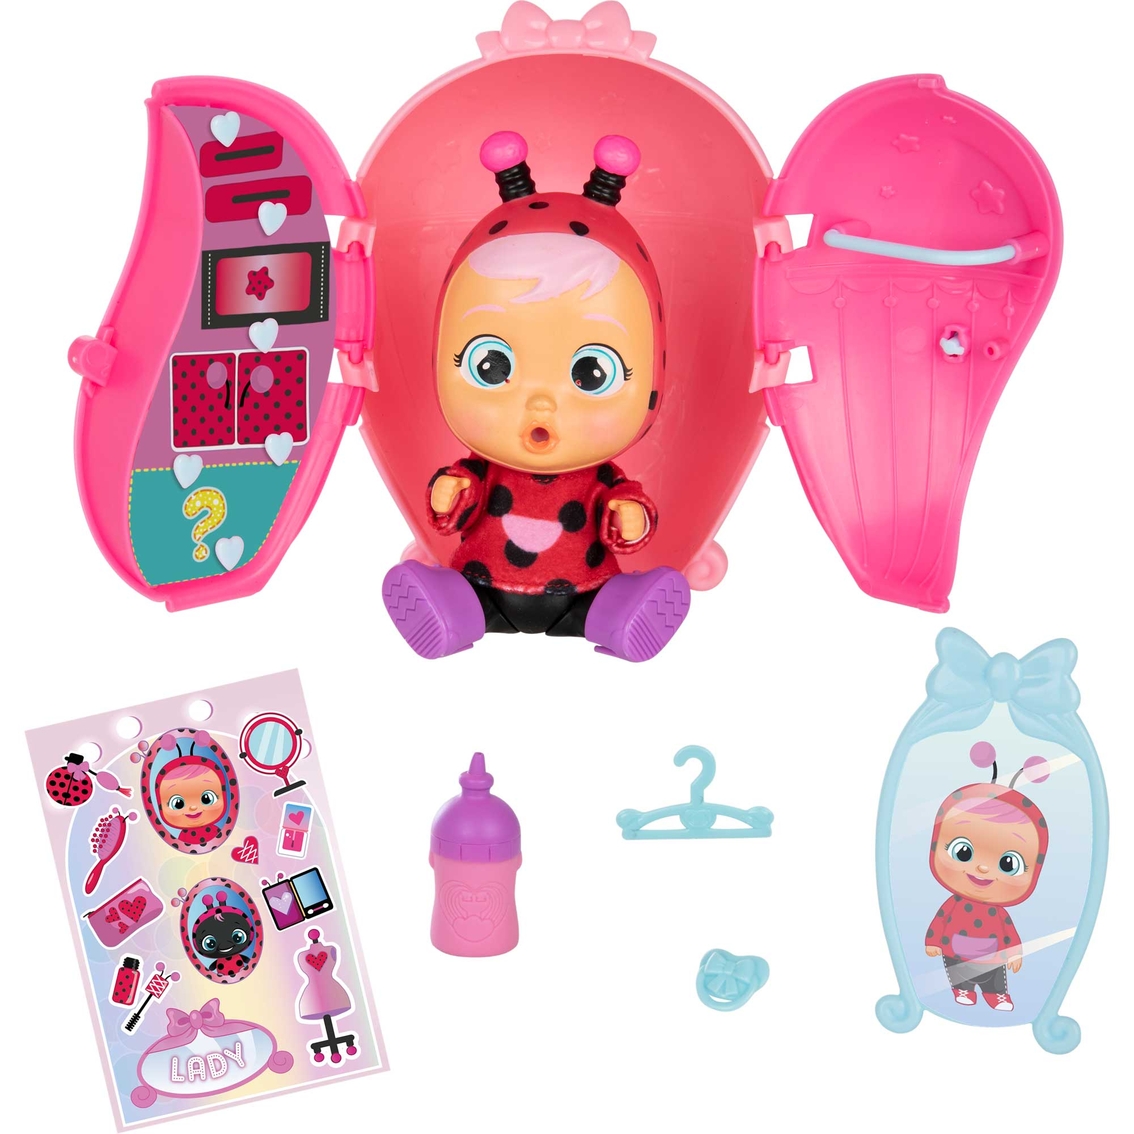 License 2 Play Cry Babies Magic Tears Dress Me Up Doll - Image 2 of 3